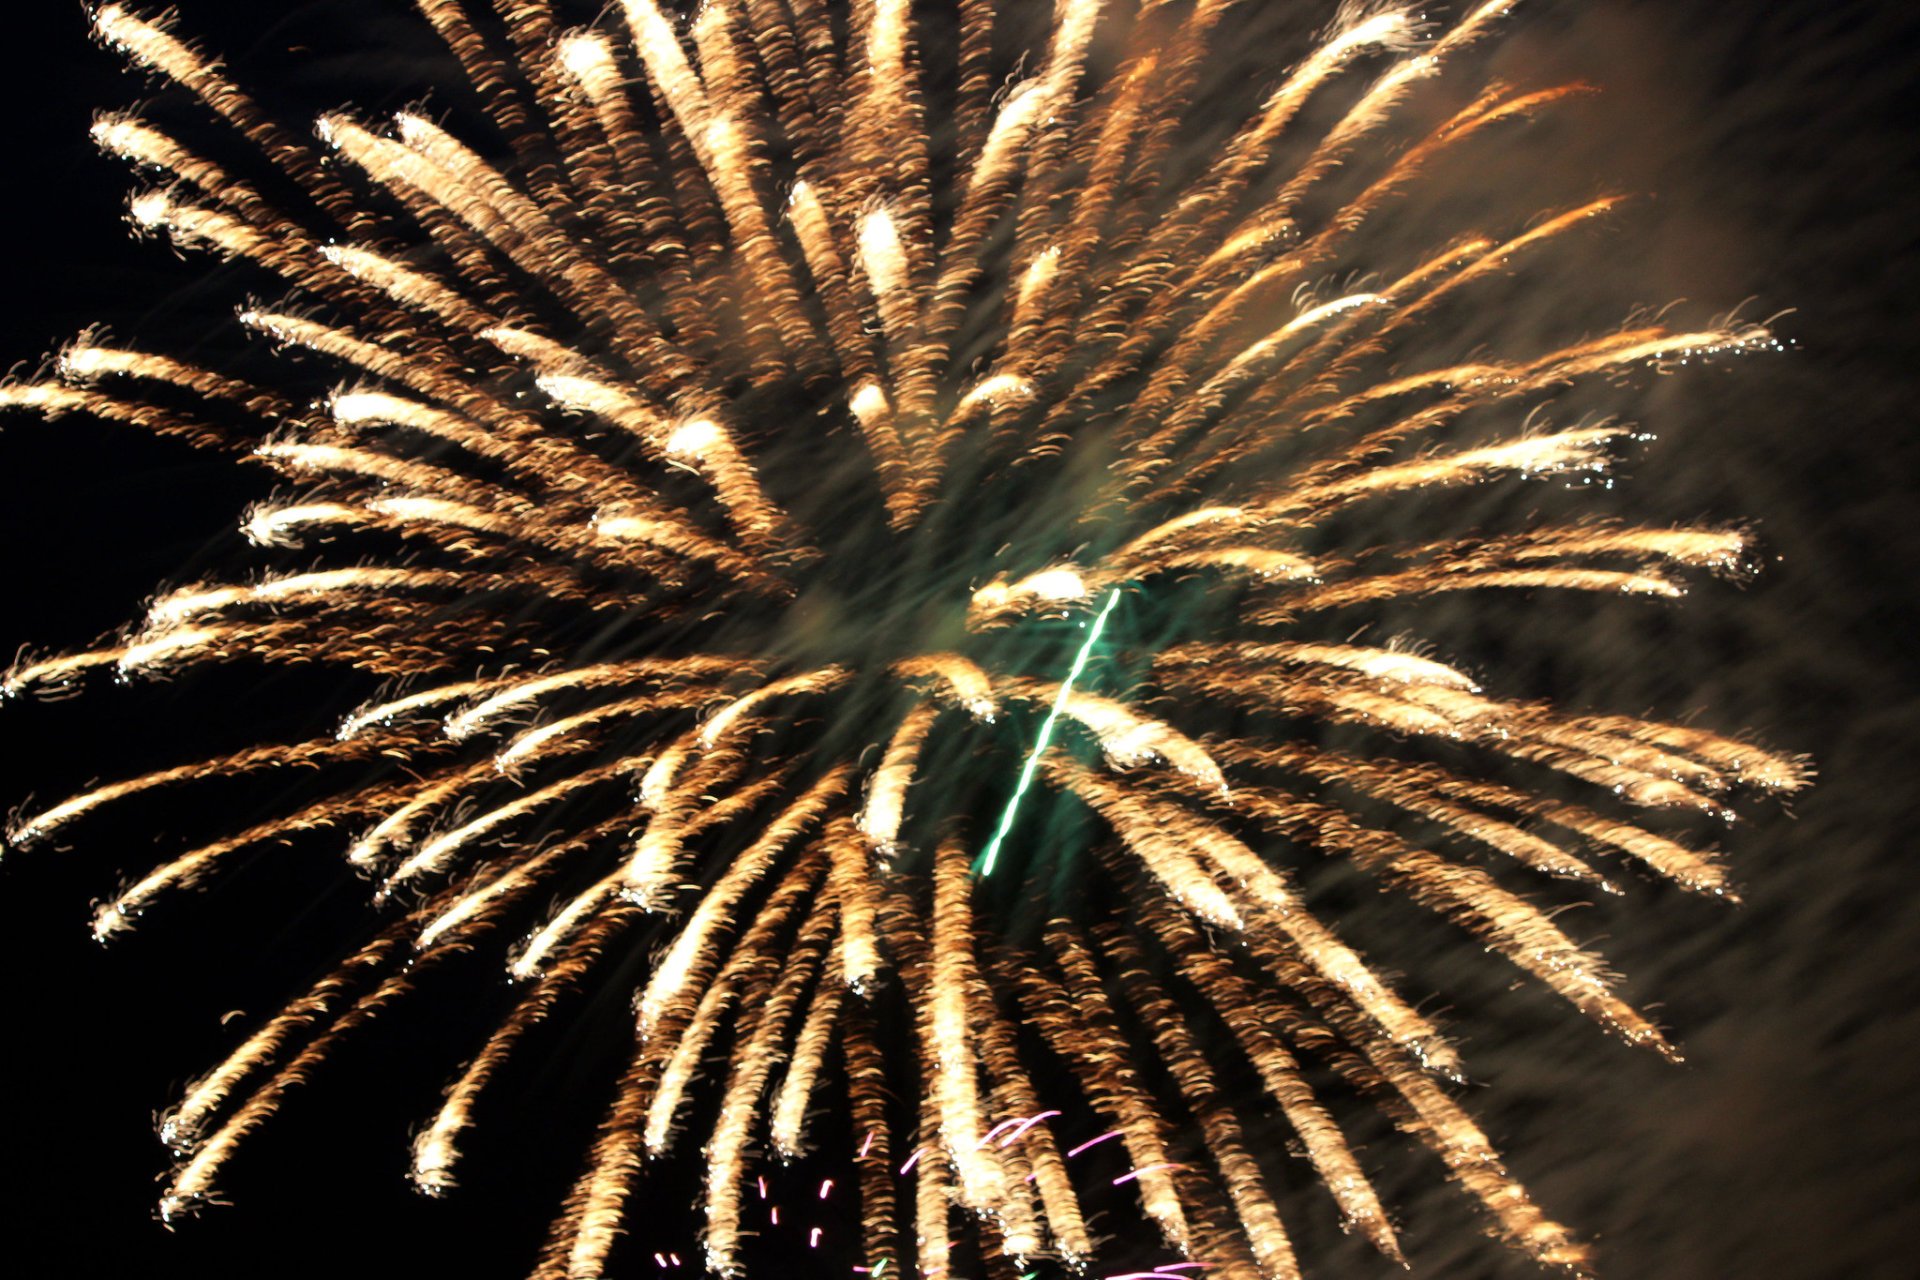 Dover 4th of July Fireworks, Parades, Shows & Events